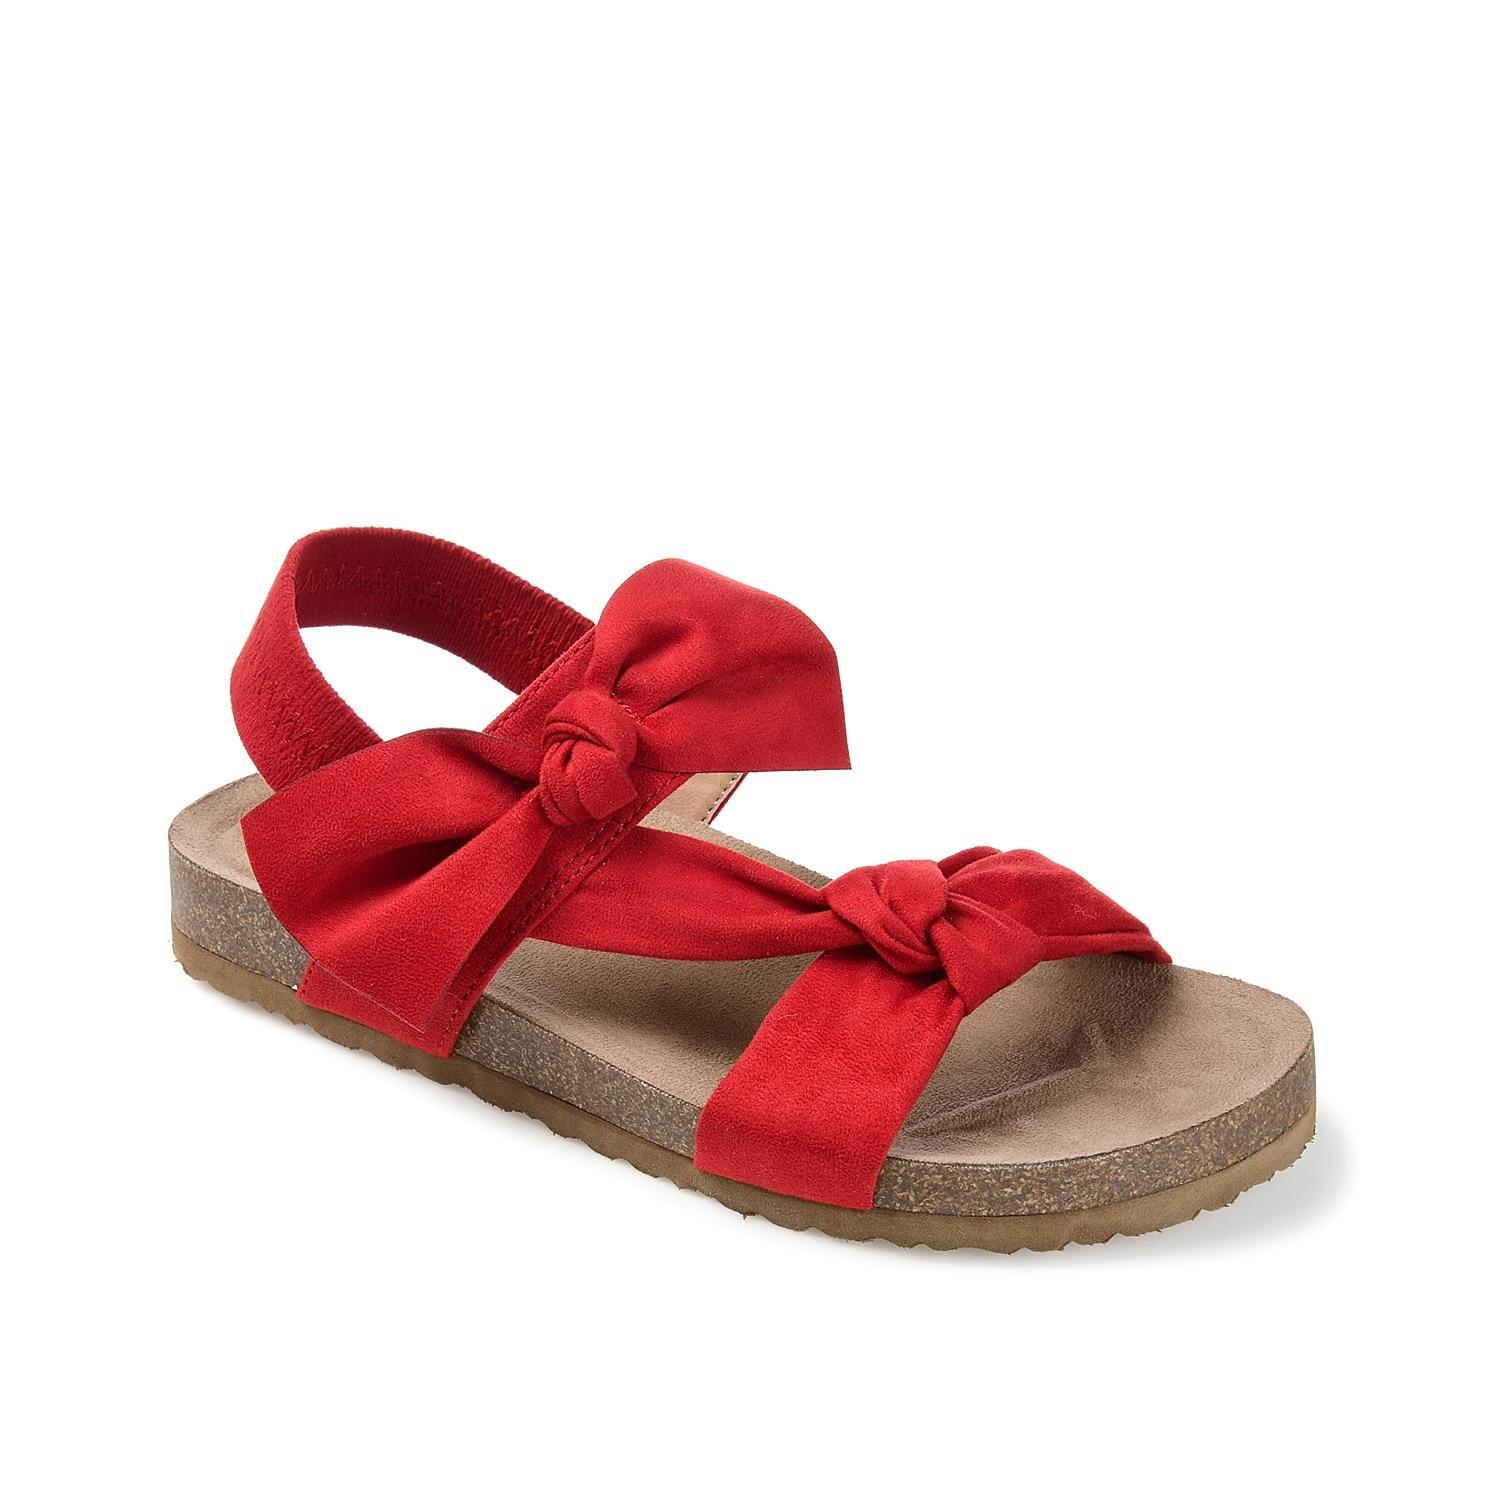 Journee Collection Xanndra Womens Sandals Red Product Image